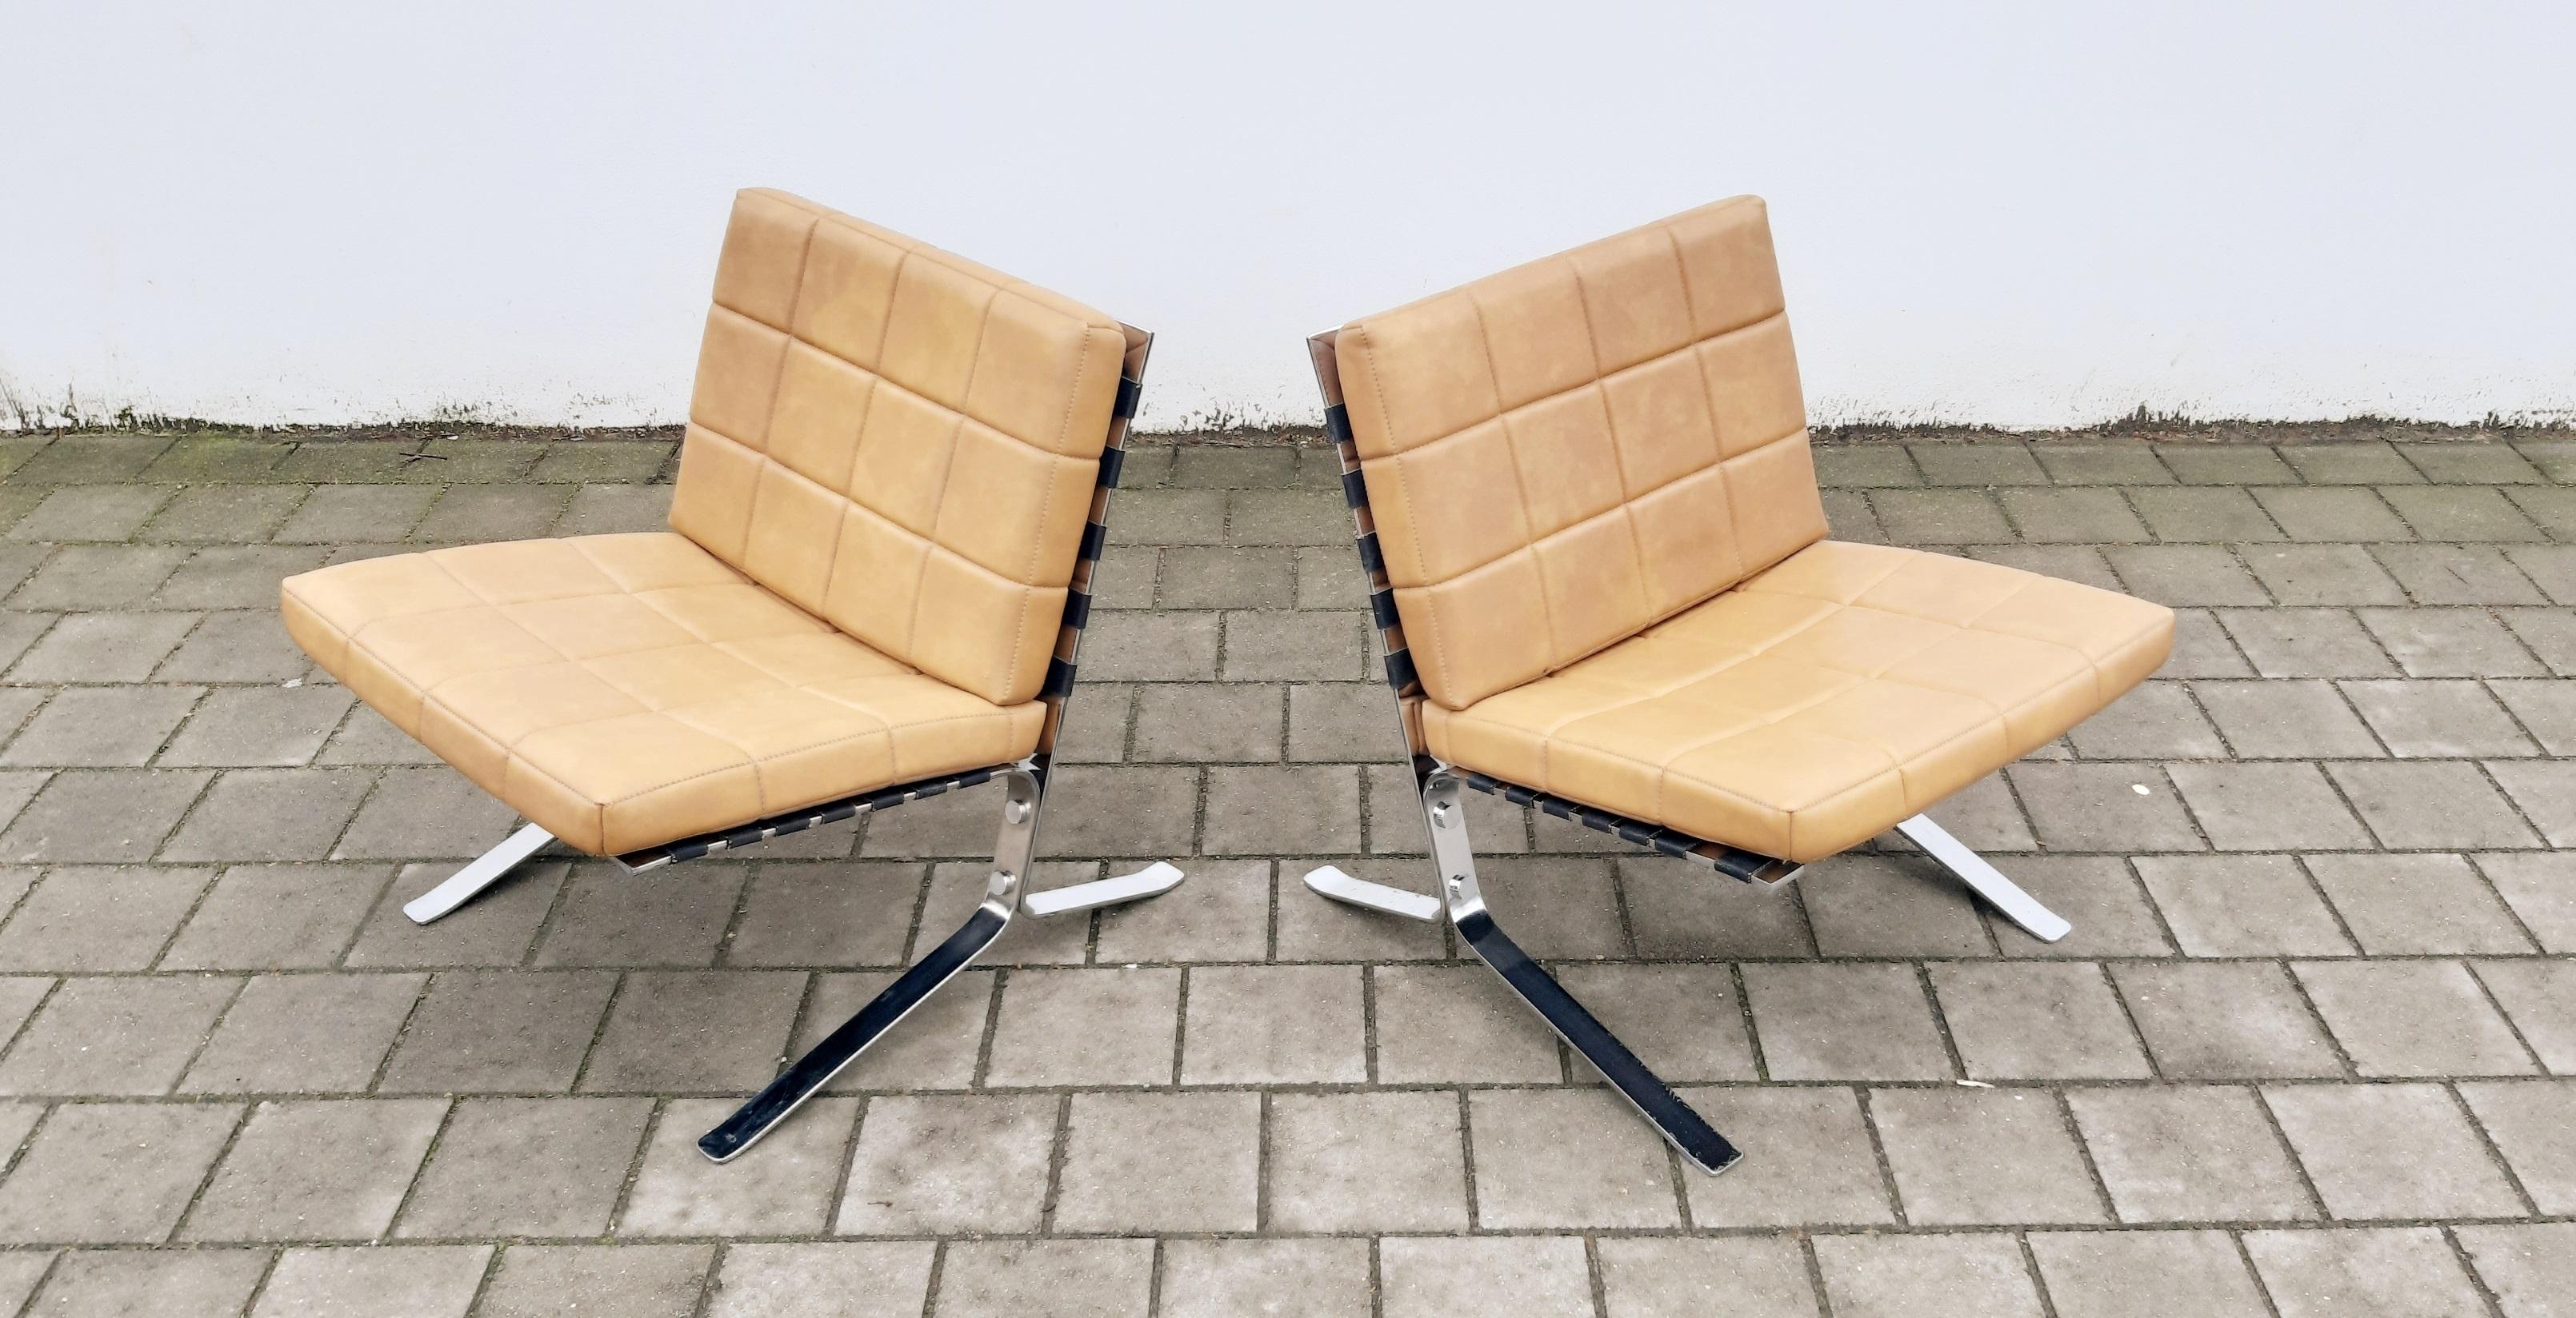 Set of 2 Joker easy chairs designed by Olivier Mourgue for Airborne in the 1960s.